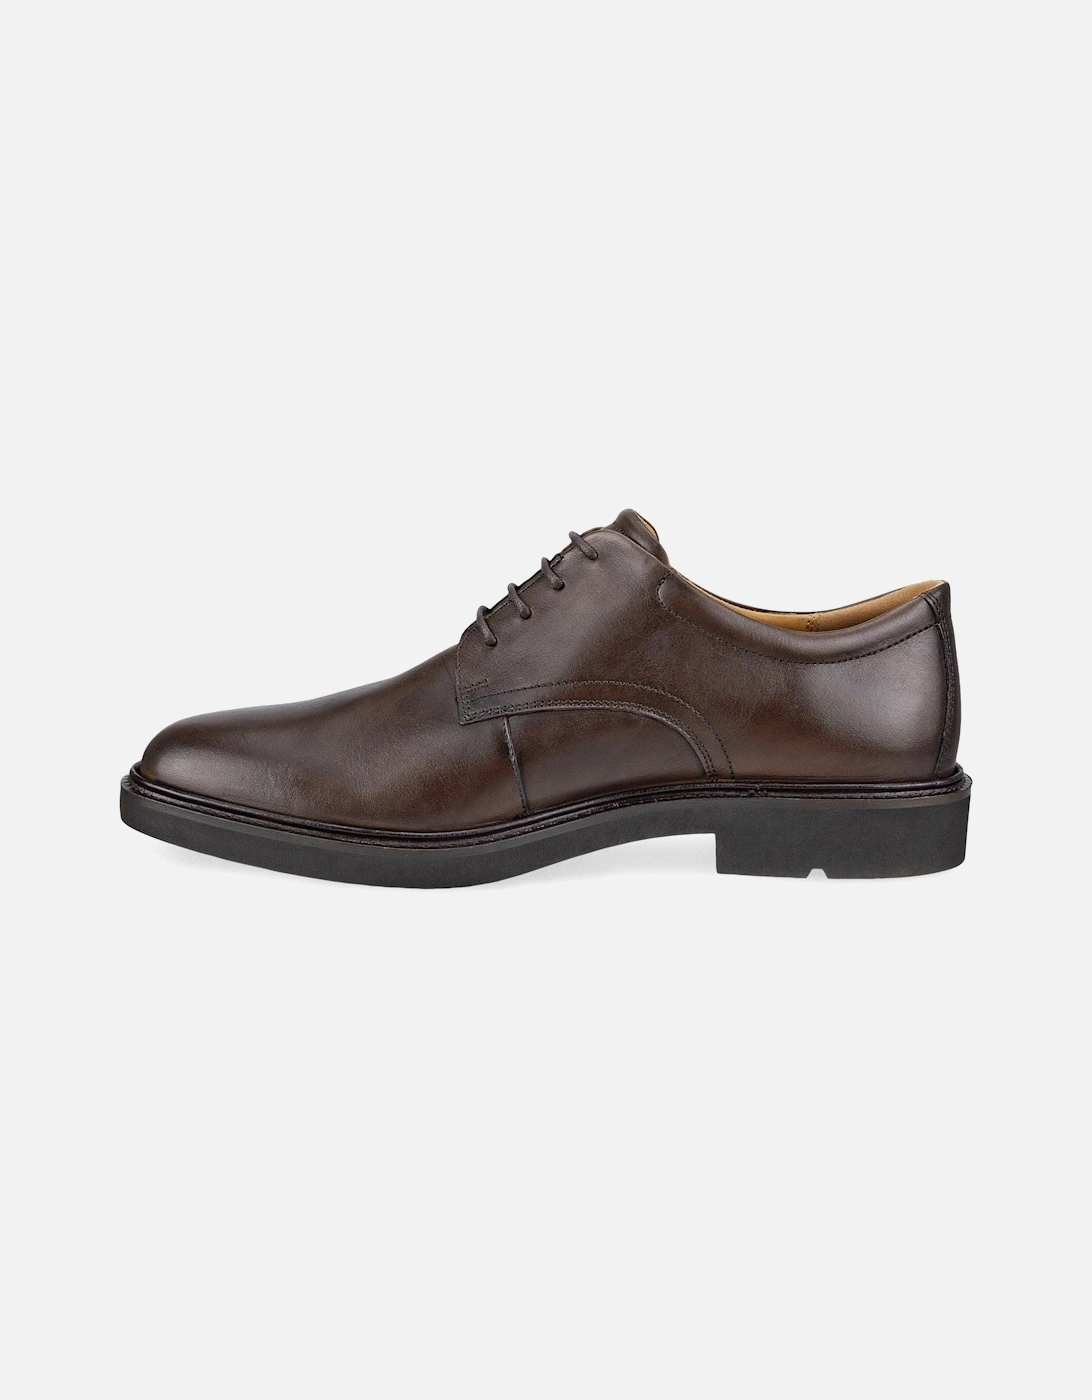 525604-01482 Smart Brown Leather shoes